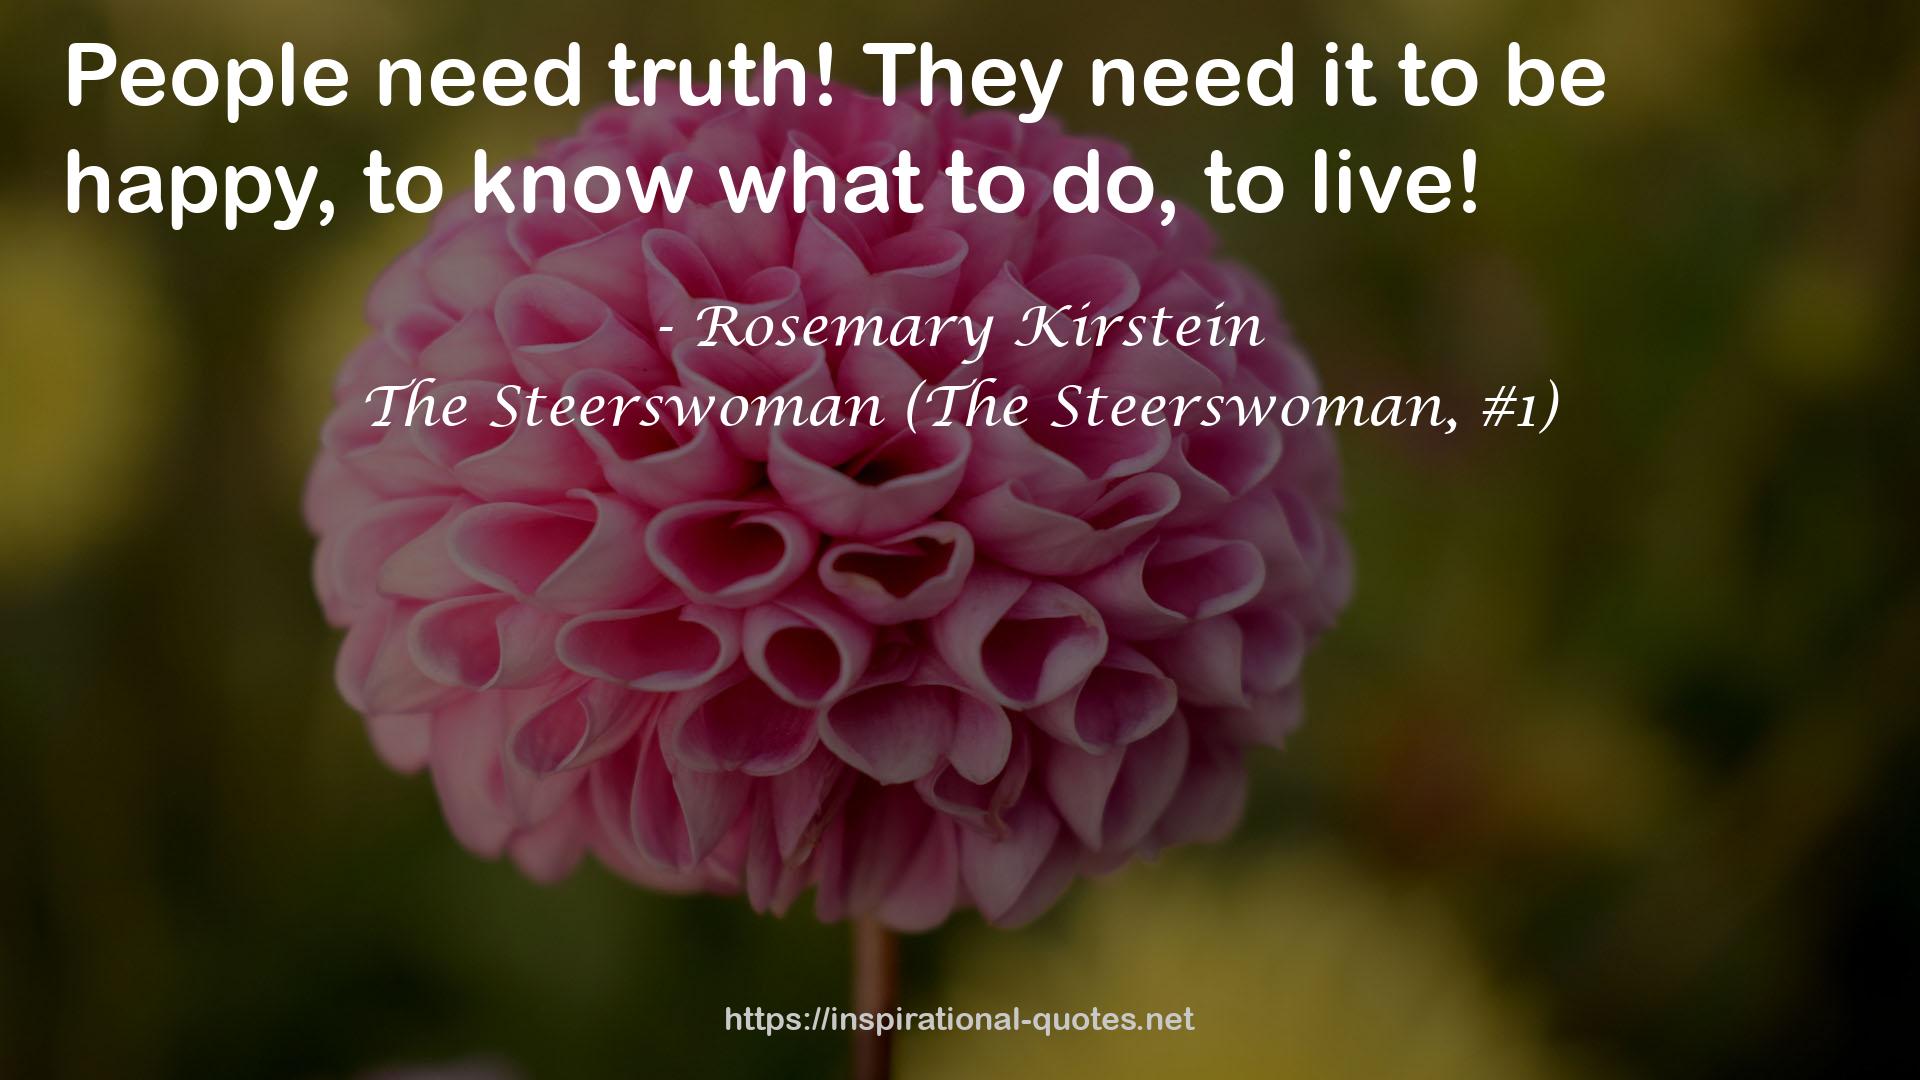 The Steerswoman (The Steerswoman, #1) QUOTES